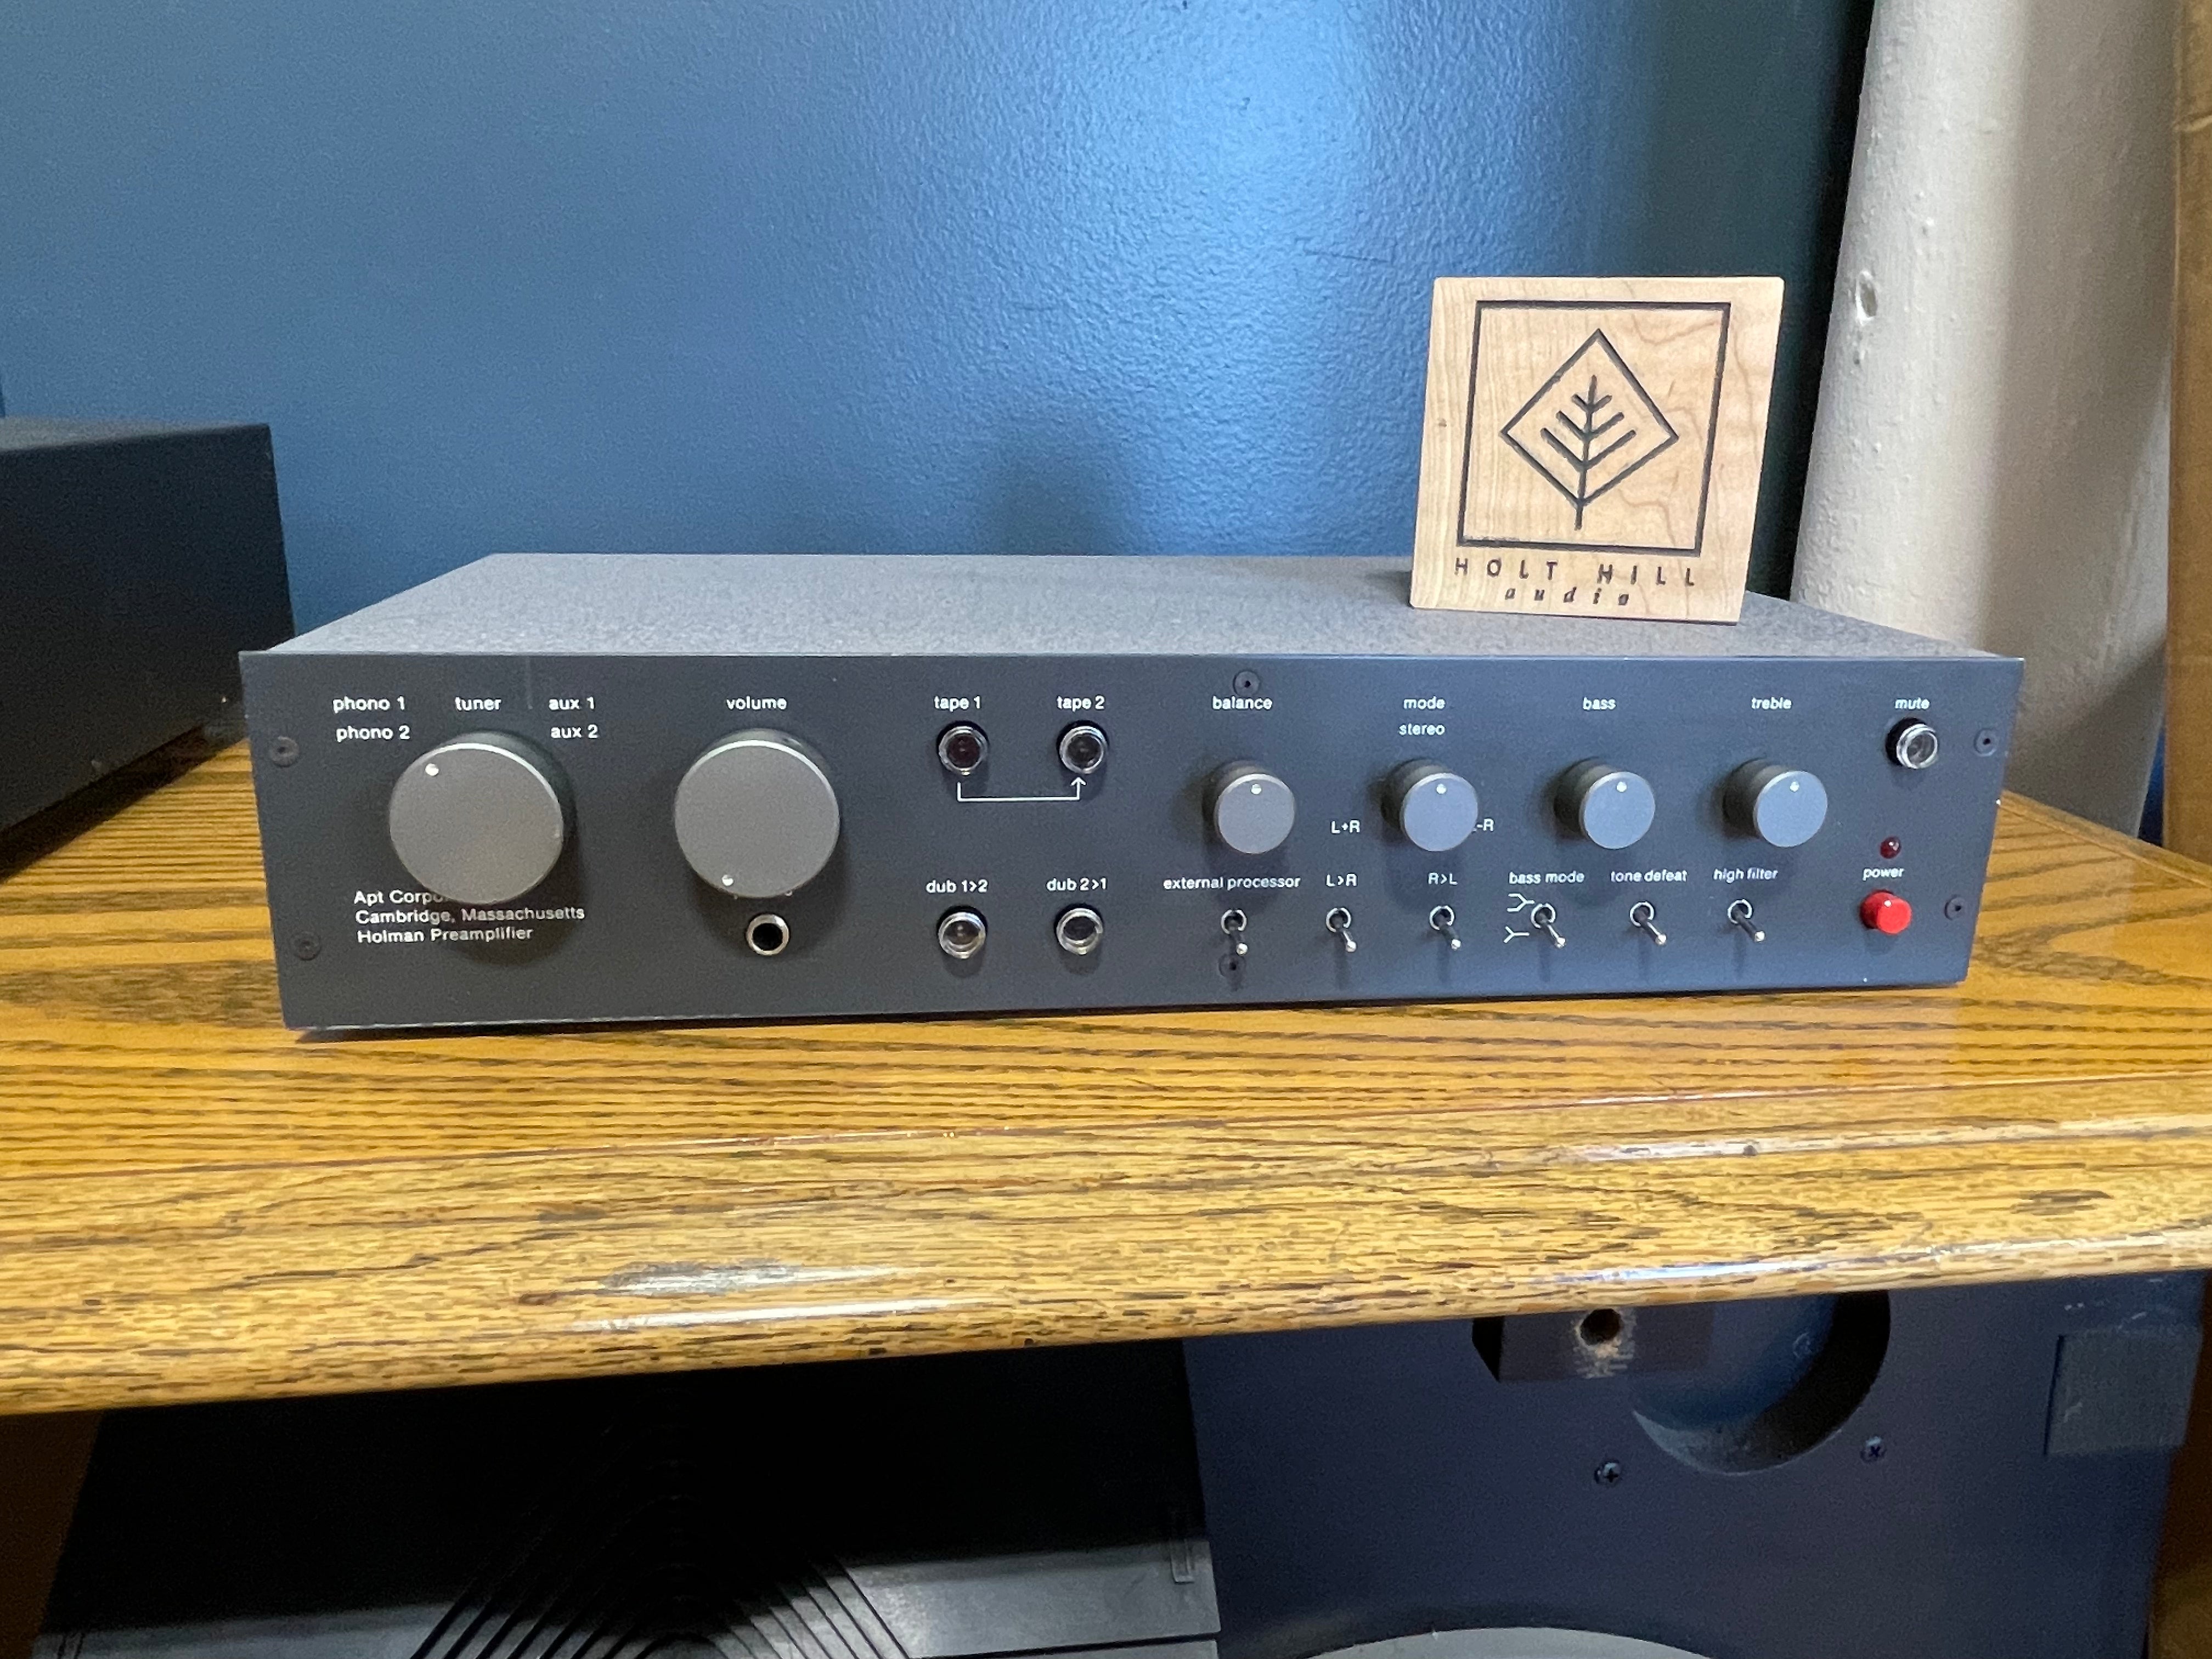 Apt Holman, Preamp - "Level 3 Mods" by AudioProz - SOLD